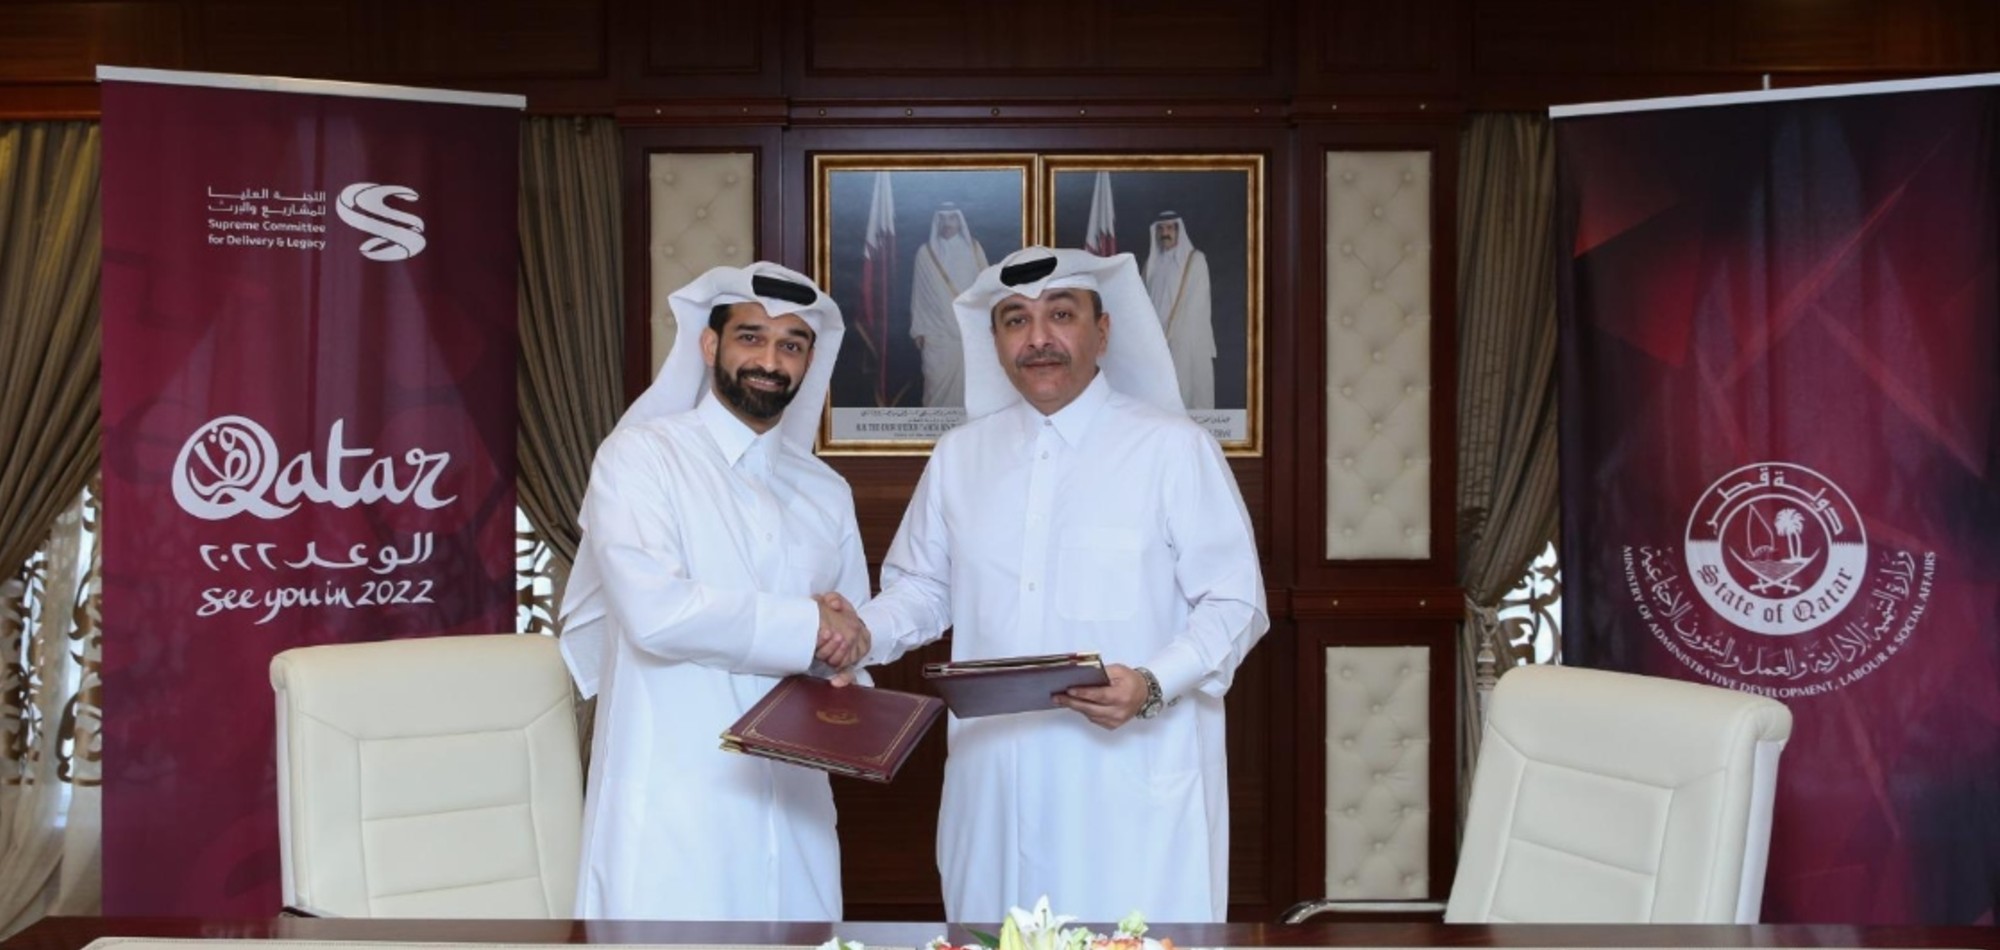 MADLSA and SC sign first batch of lease agreements in Qatar to secure accommodations for the FIFA World Cup 2022™️